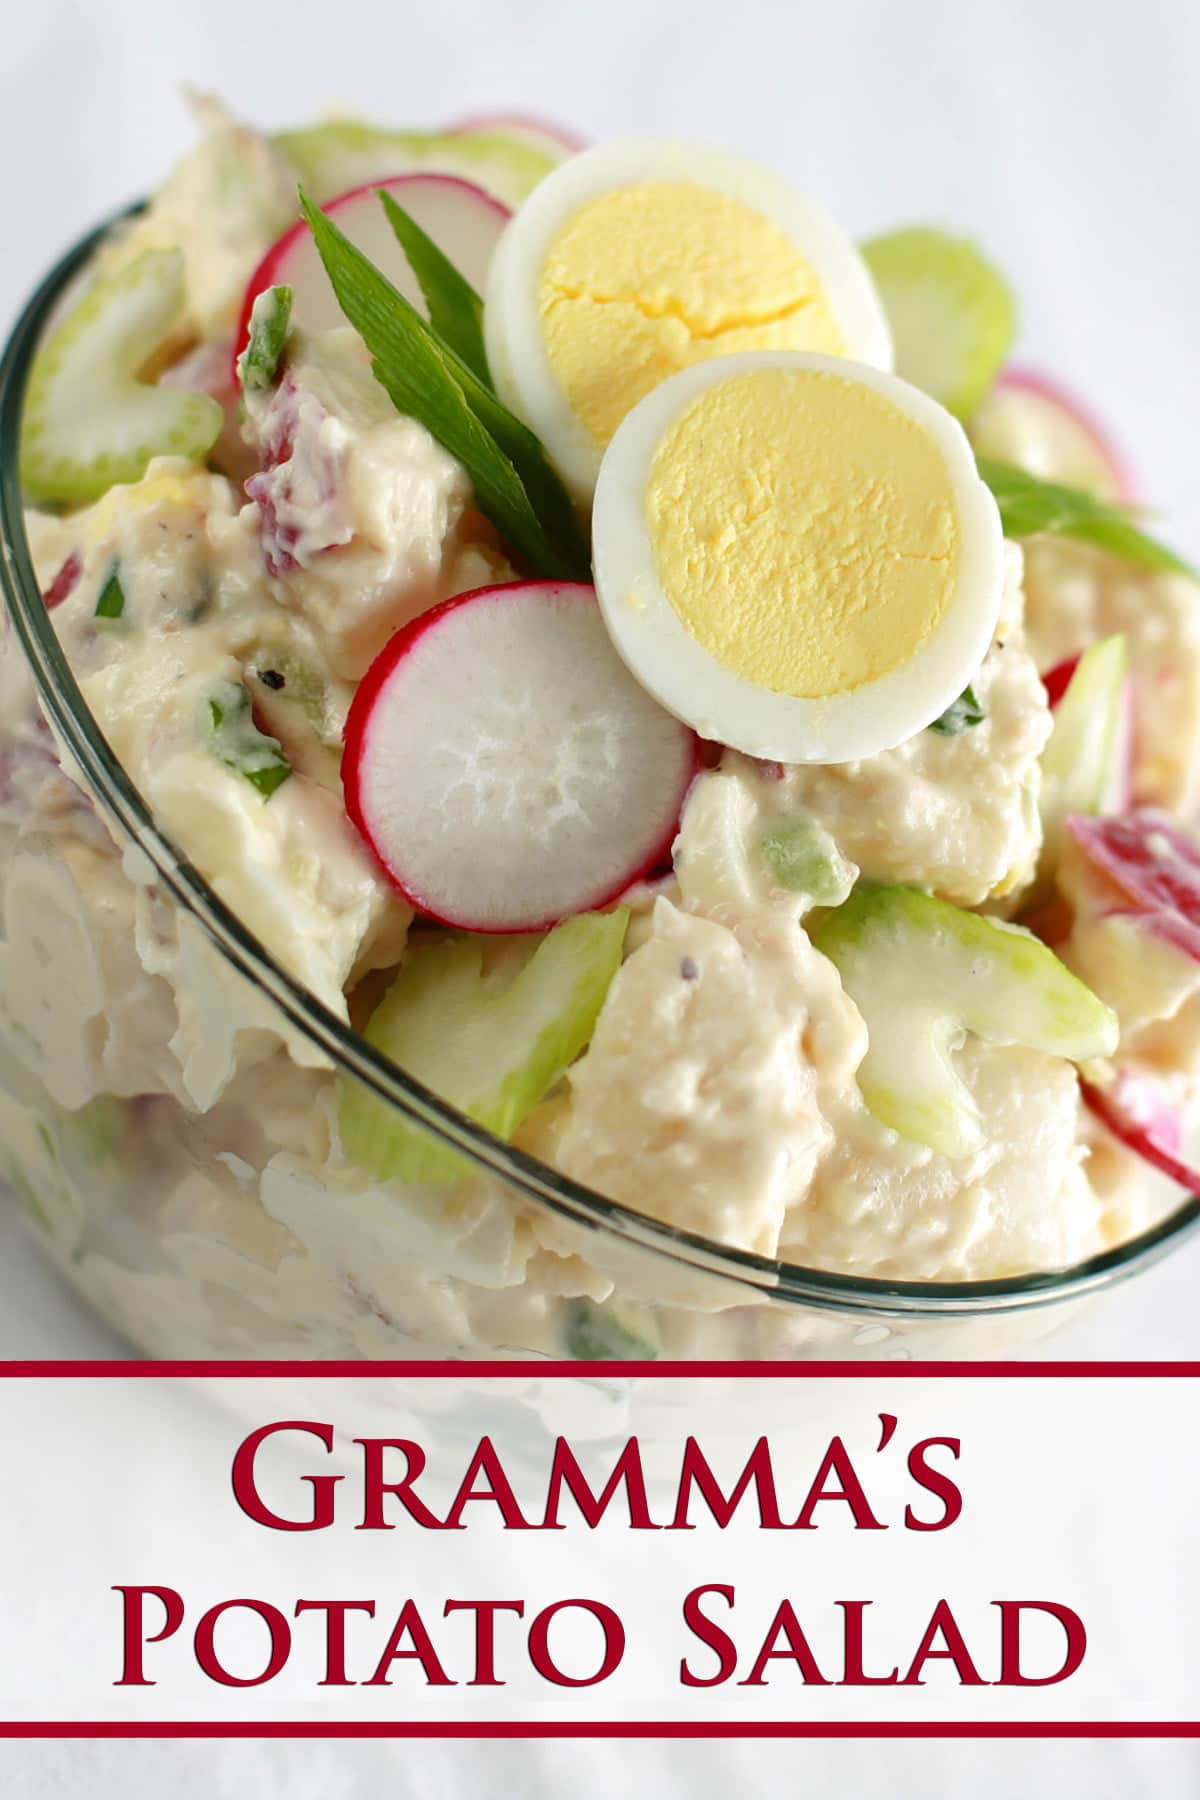 A bowl of Gramma's Potato Salad - a creamy potato salad with slices of celery, radish, green onion, and hardboiled egg visible.